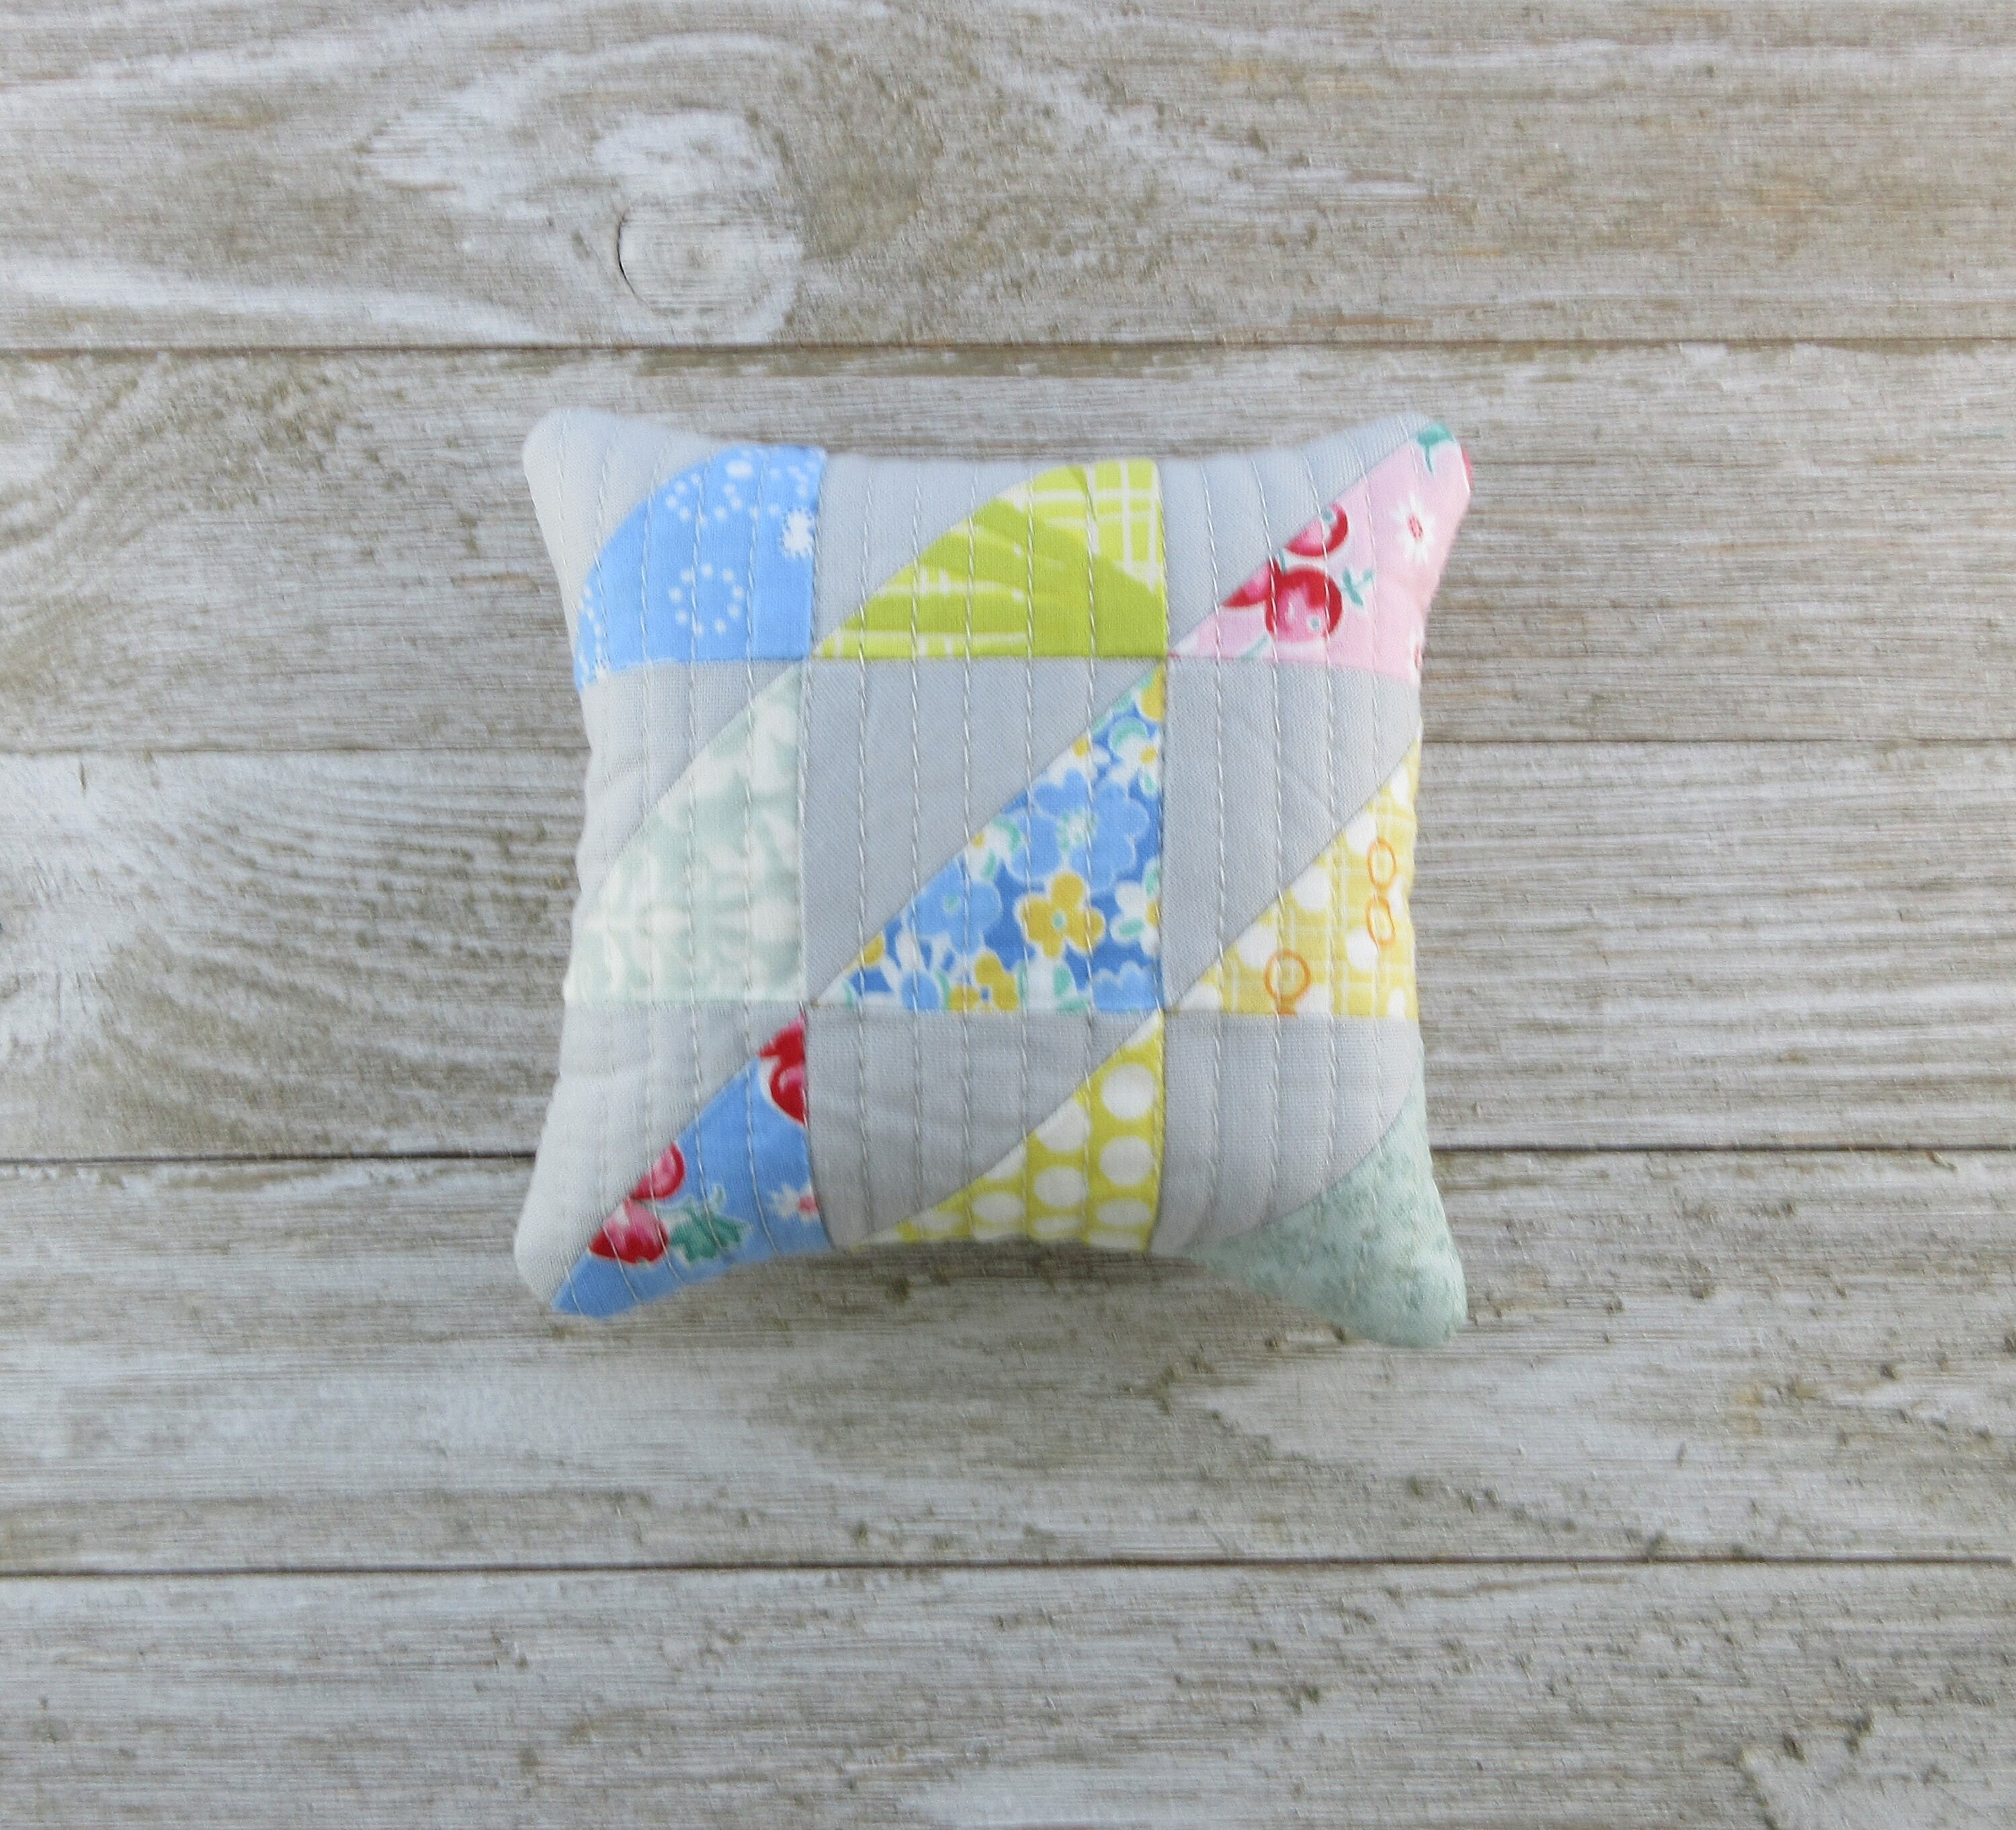 Scrappy Pincushion That Also Holds Fabric Clips – Sewing Tutorial – Sewing